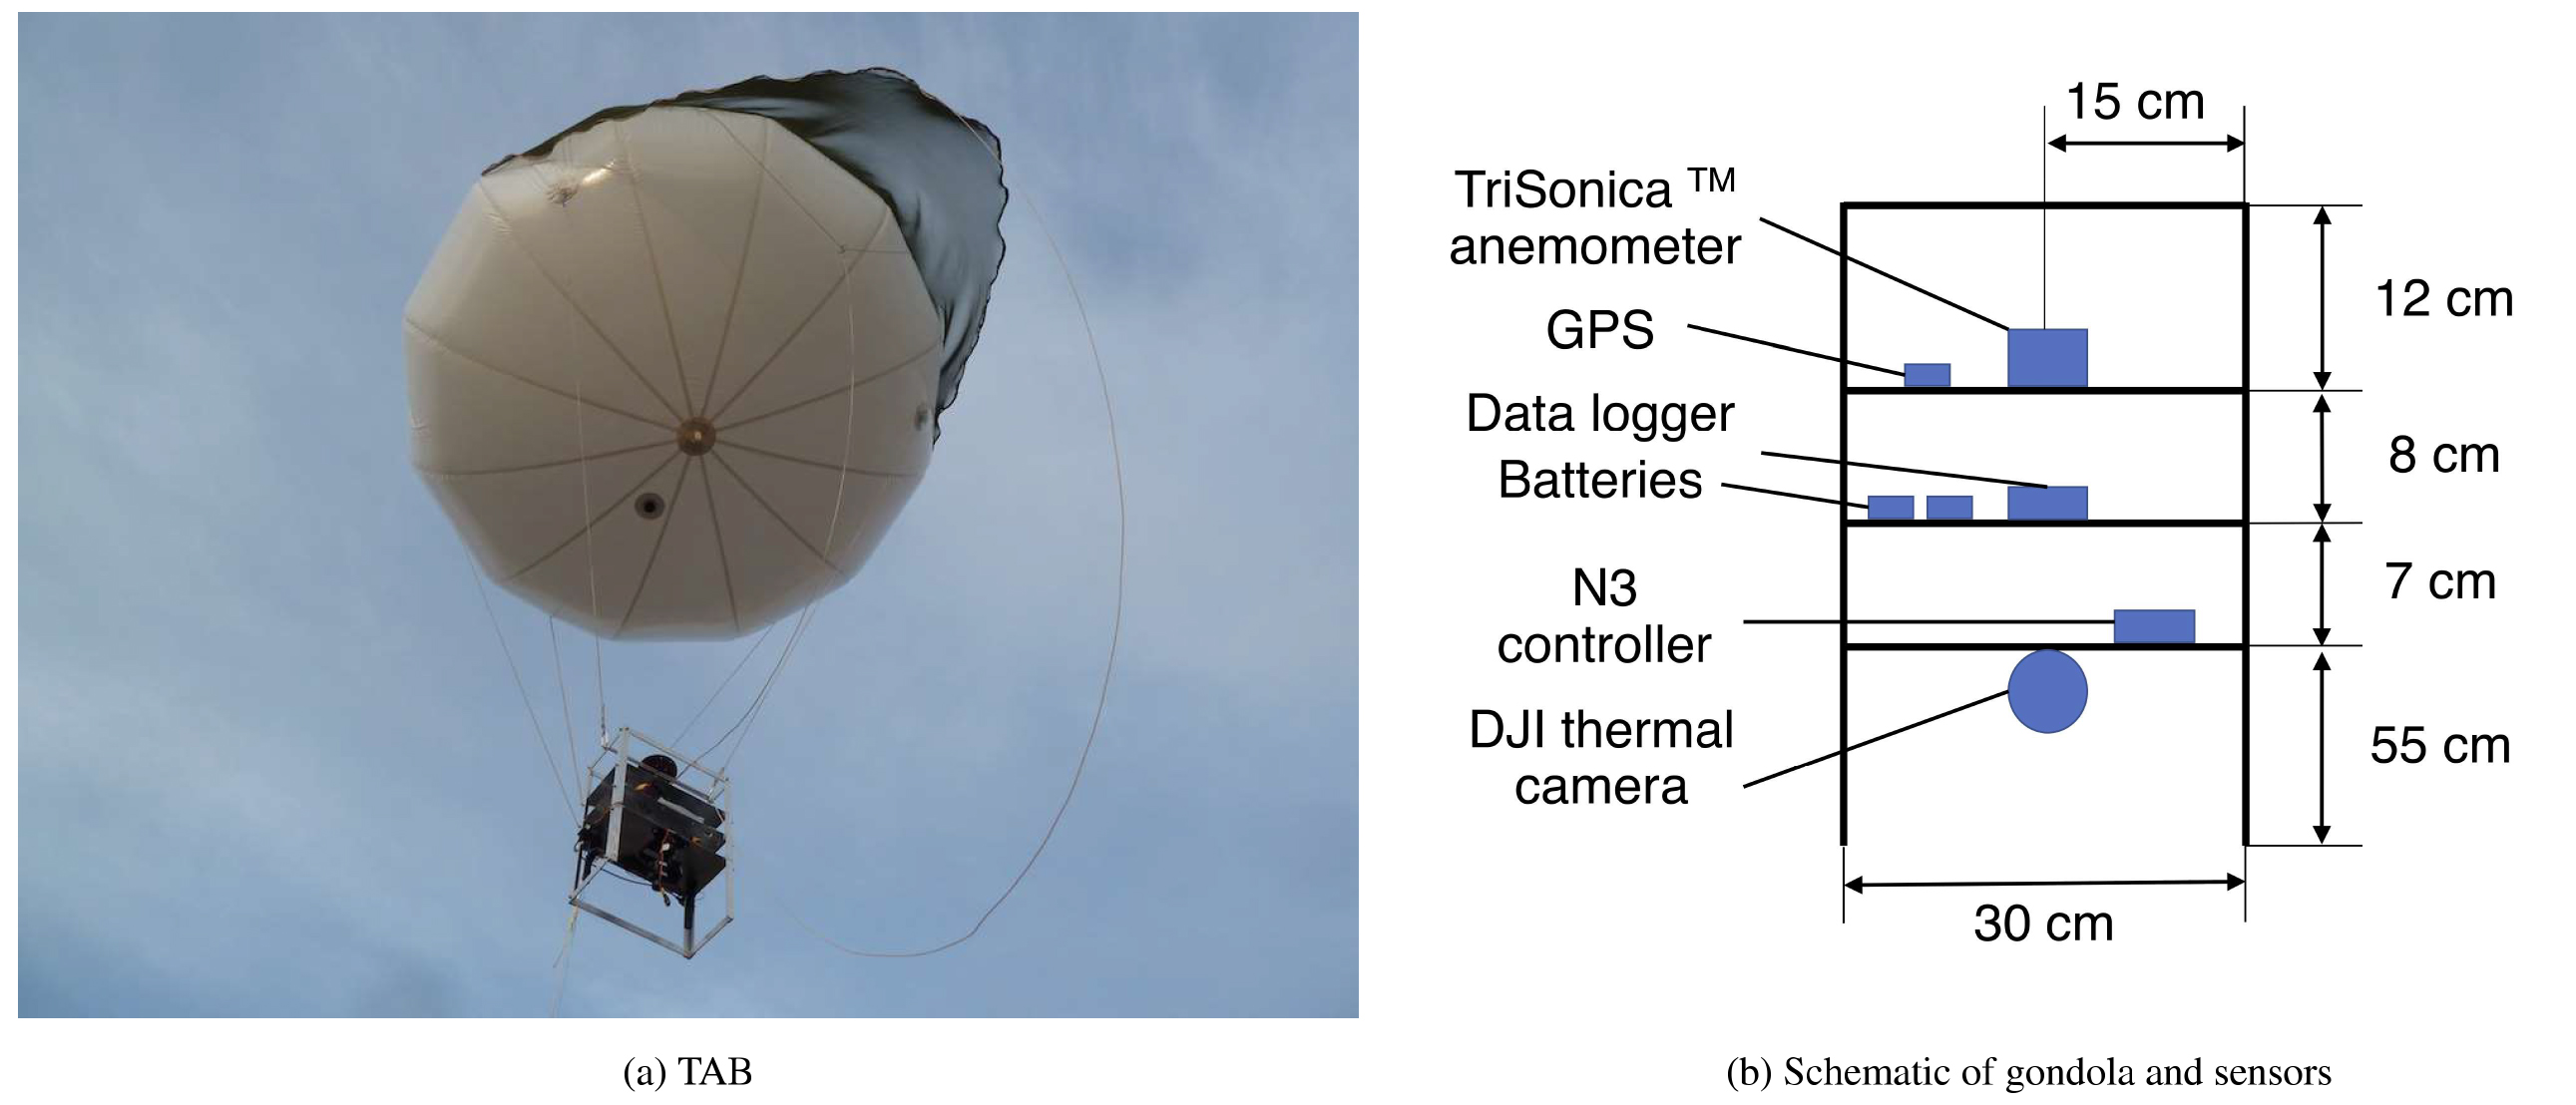 A Tethered Air Blimp (TAB) for observing the microclimate over a complex terrain